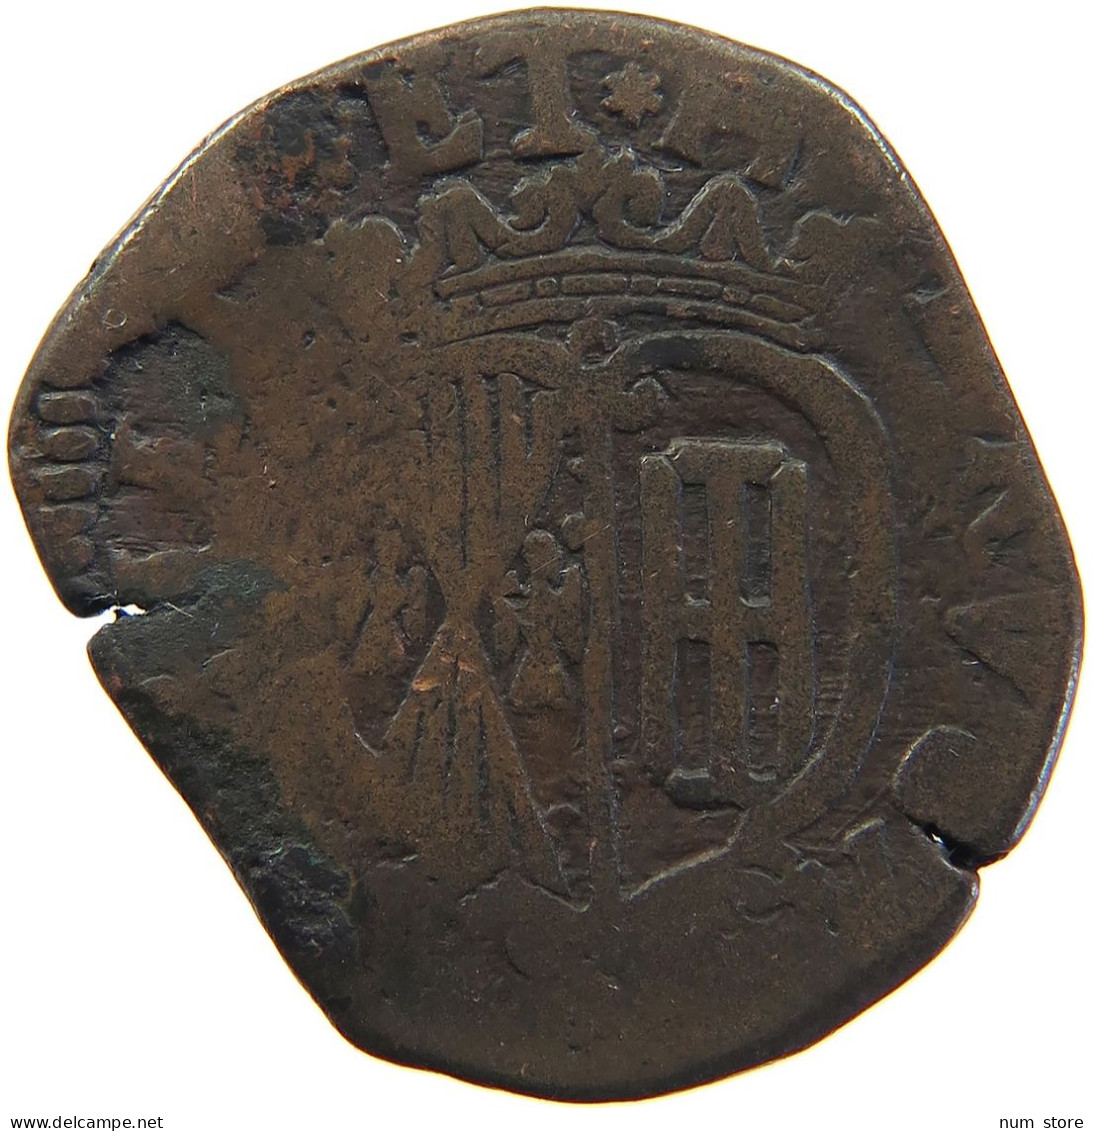 ITALY STATES GRANO NAPLES CHARLES II #s100 0371 - Neapel & Sizilien